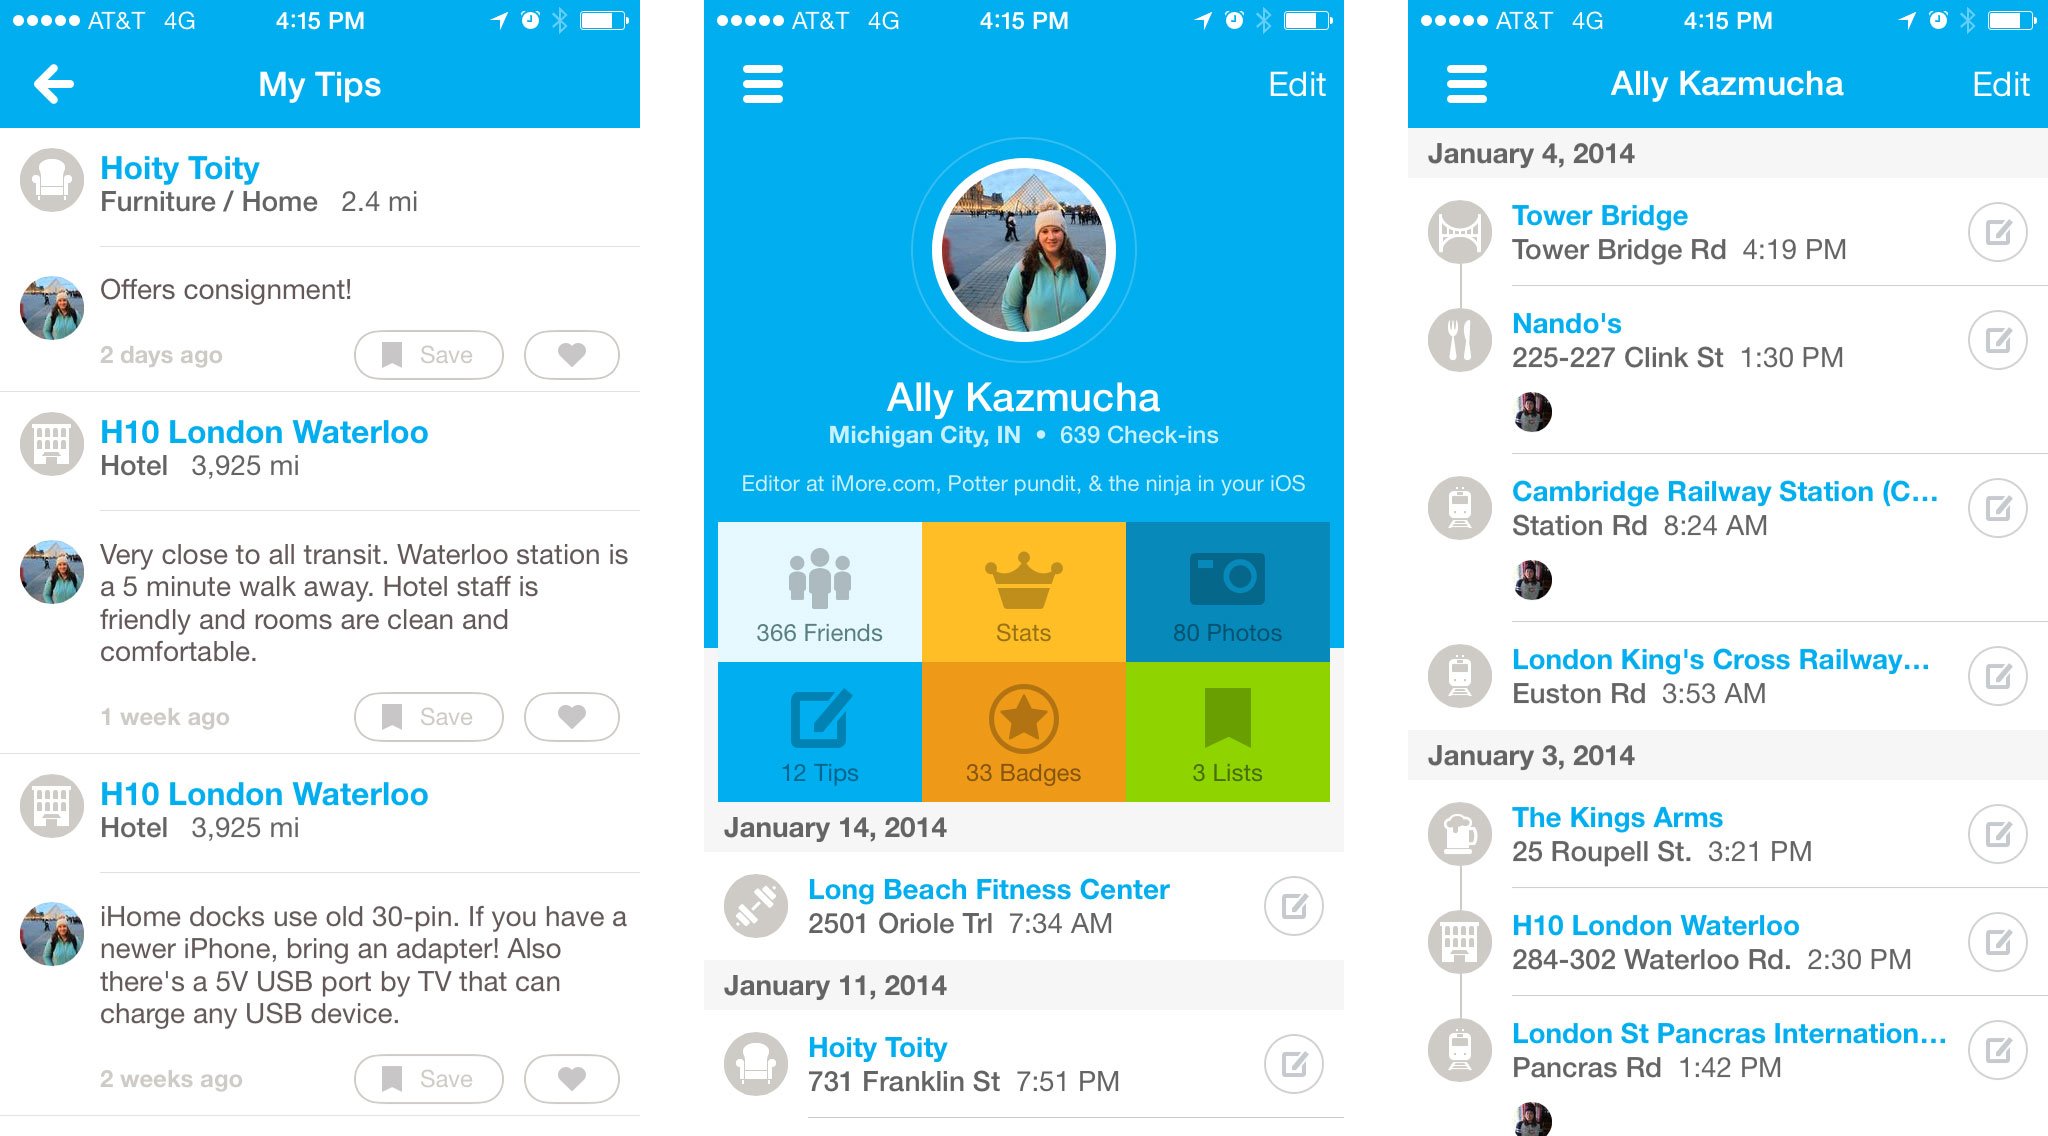 Best travel companion apps for iPhone: Foursquare